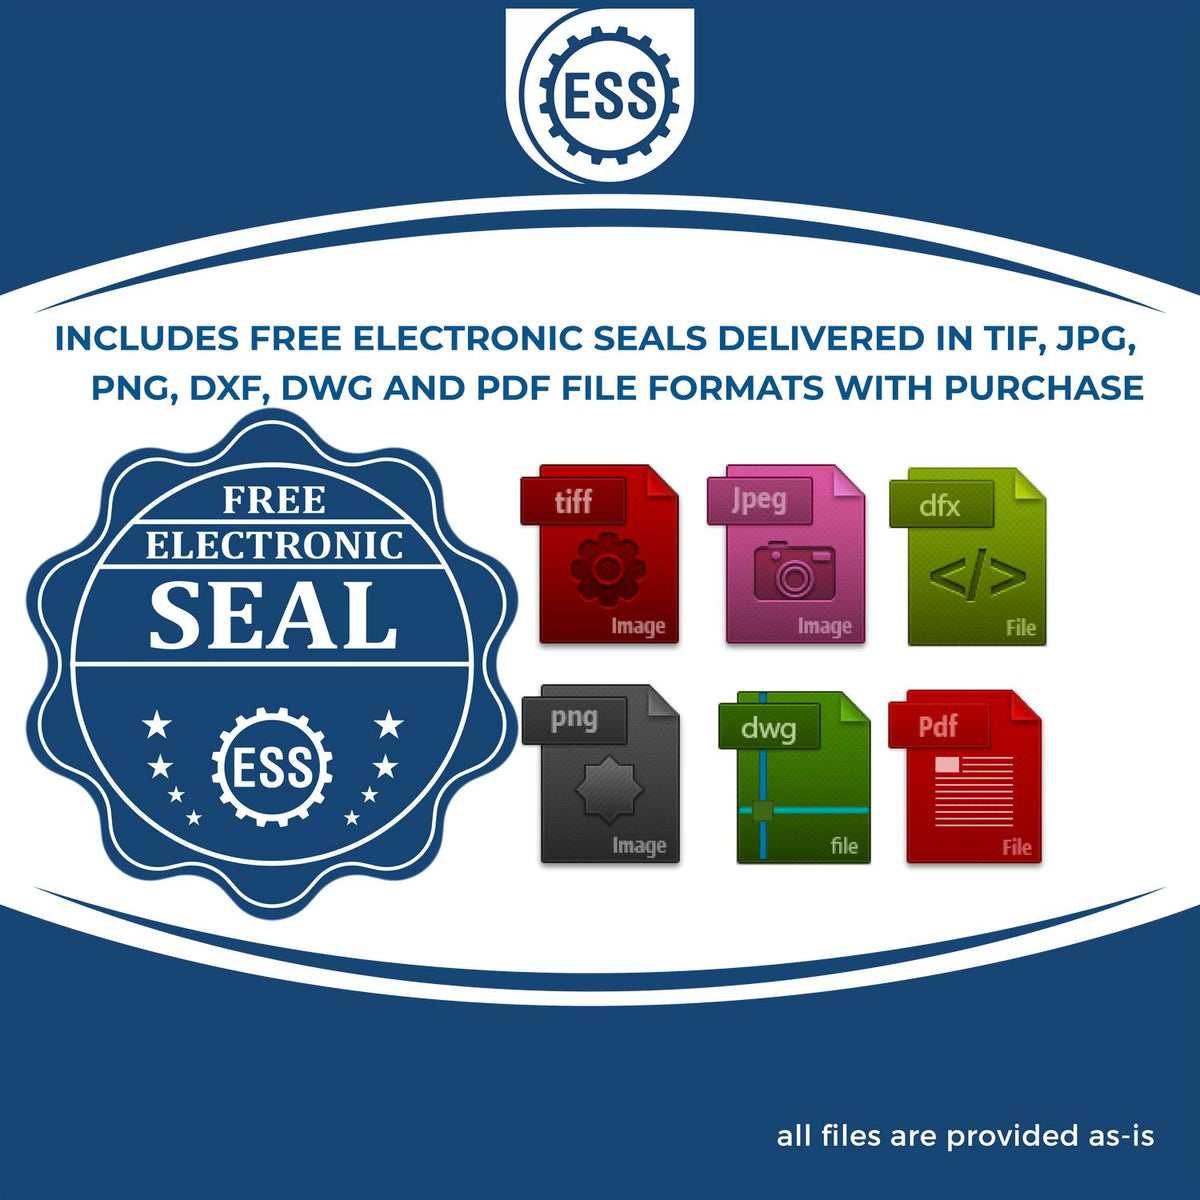 An infographic for the free electronic seal for the Long Reach Connecticut Geology Seal illustrating the different file type icons such as DXF, DWG, TIF, JPG and PNG.